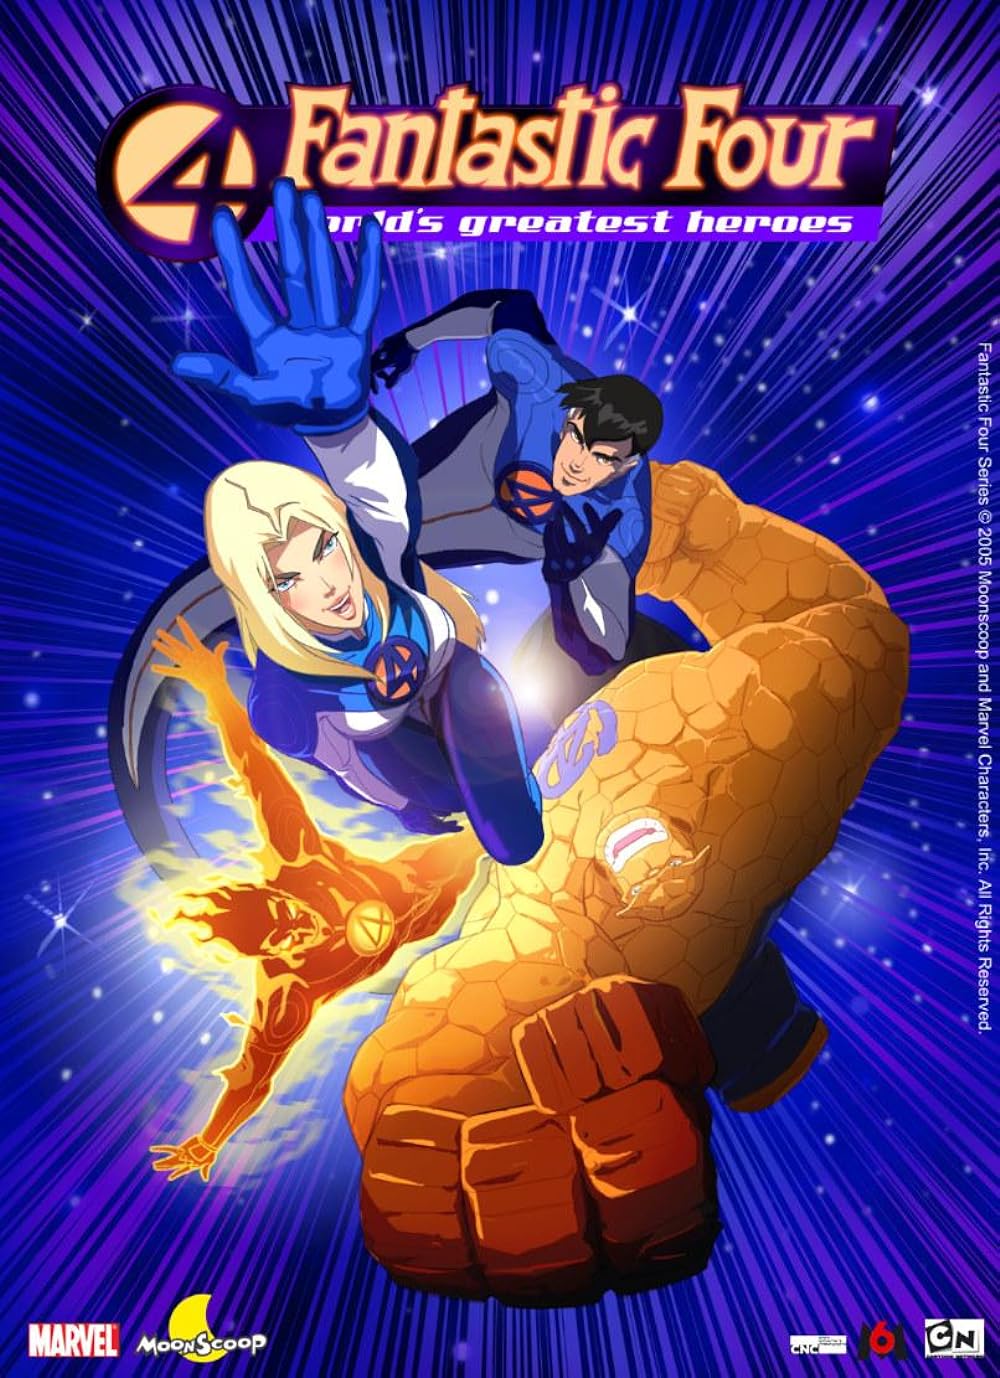 Fantastic Four - World's Greatest Heroes (2006-2010) [1080p]